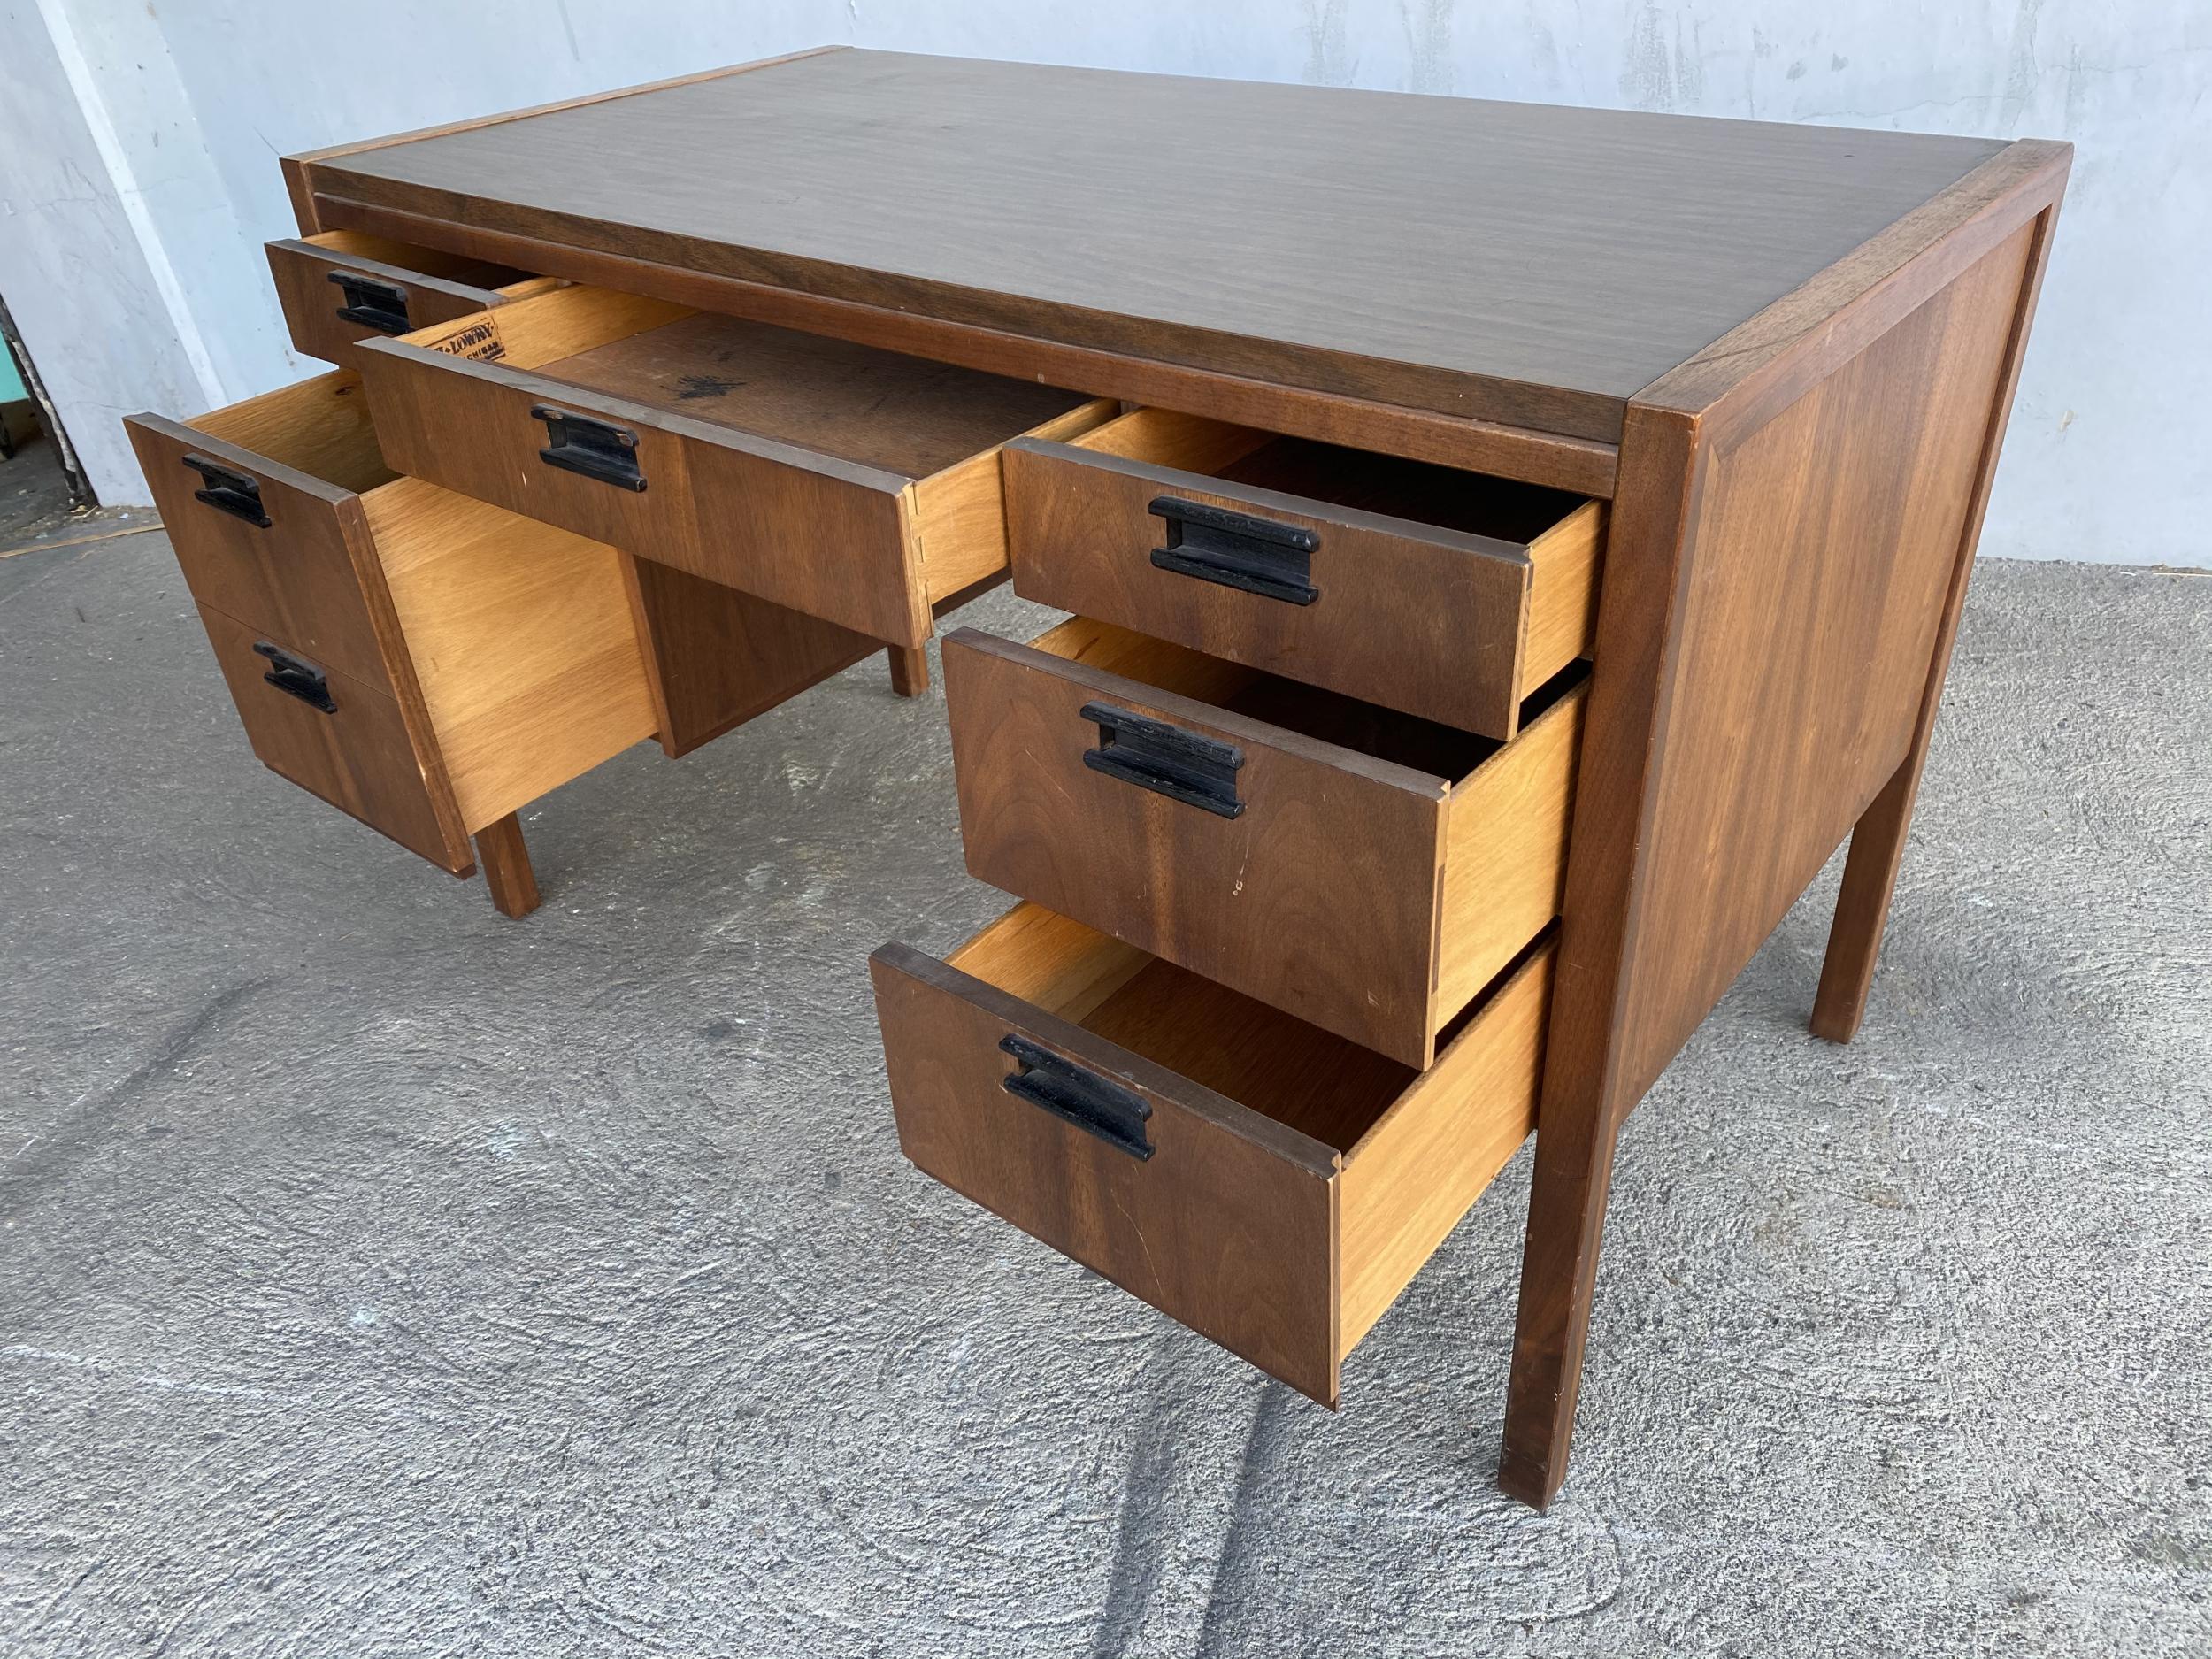 Midcentury Danish Modern Teak Writing Desk w/ Woven Wicker Front by Sligh Lowry In Excellent Condition For Sale In Van Nuys, CA